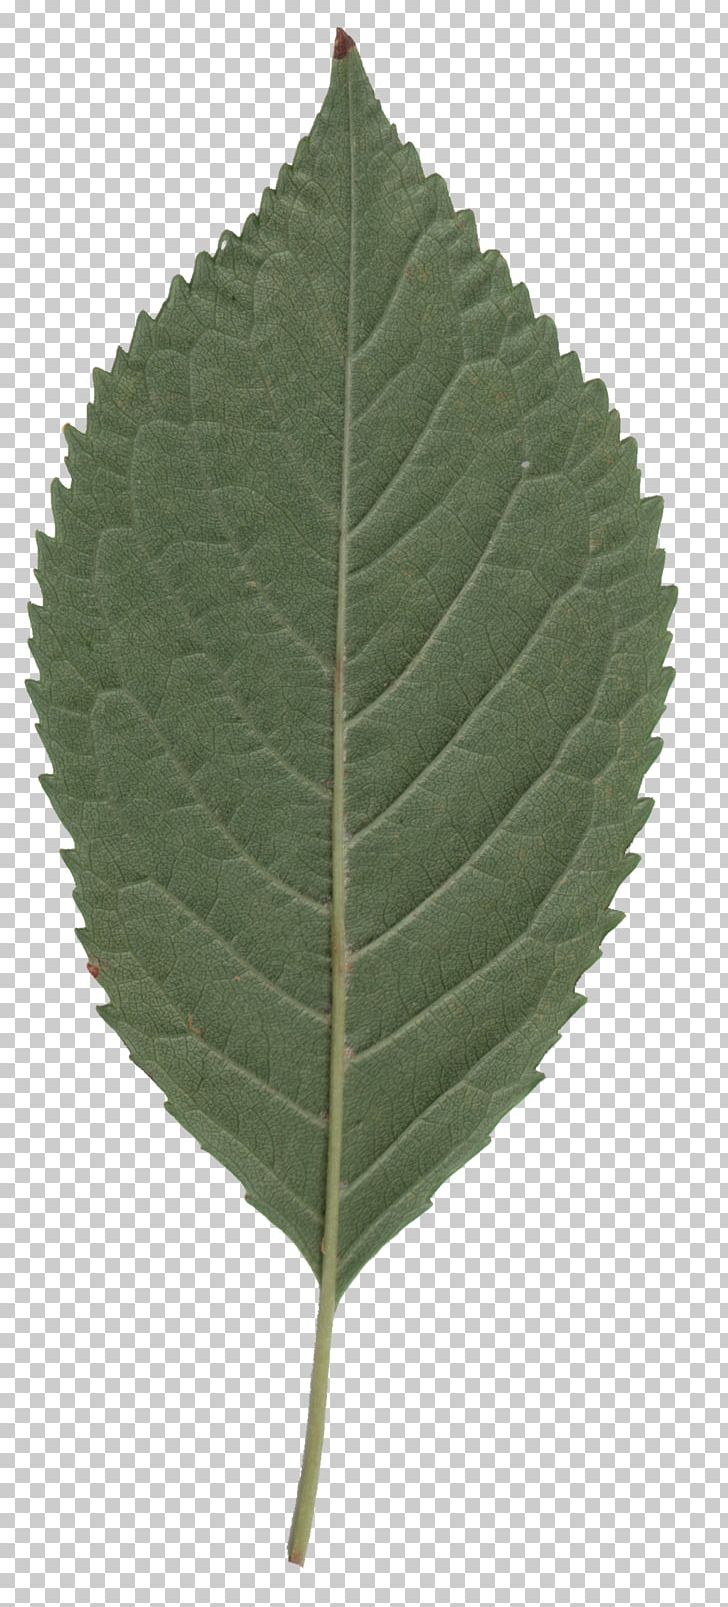 Cherry Leaf Spot Cottonwood Tree Sweet Cherry PNG, Clipart, Bud, Cherry, Cherry Leaf Spot, Clover, Cottonwood Free PNG Download